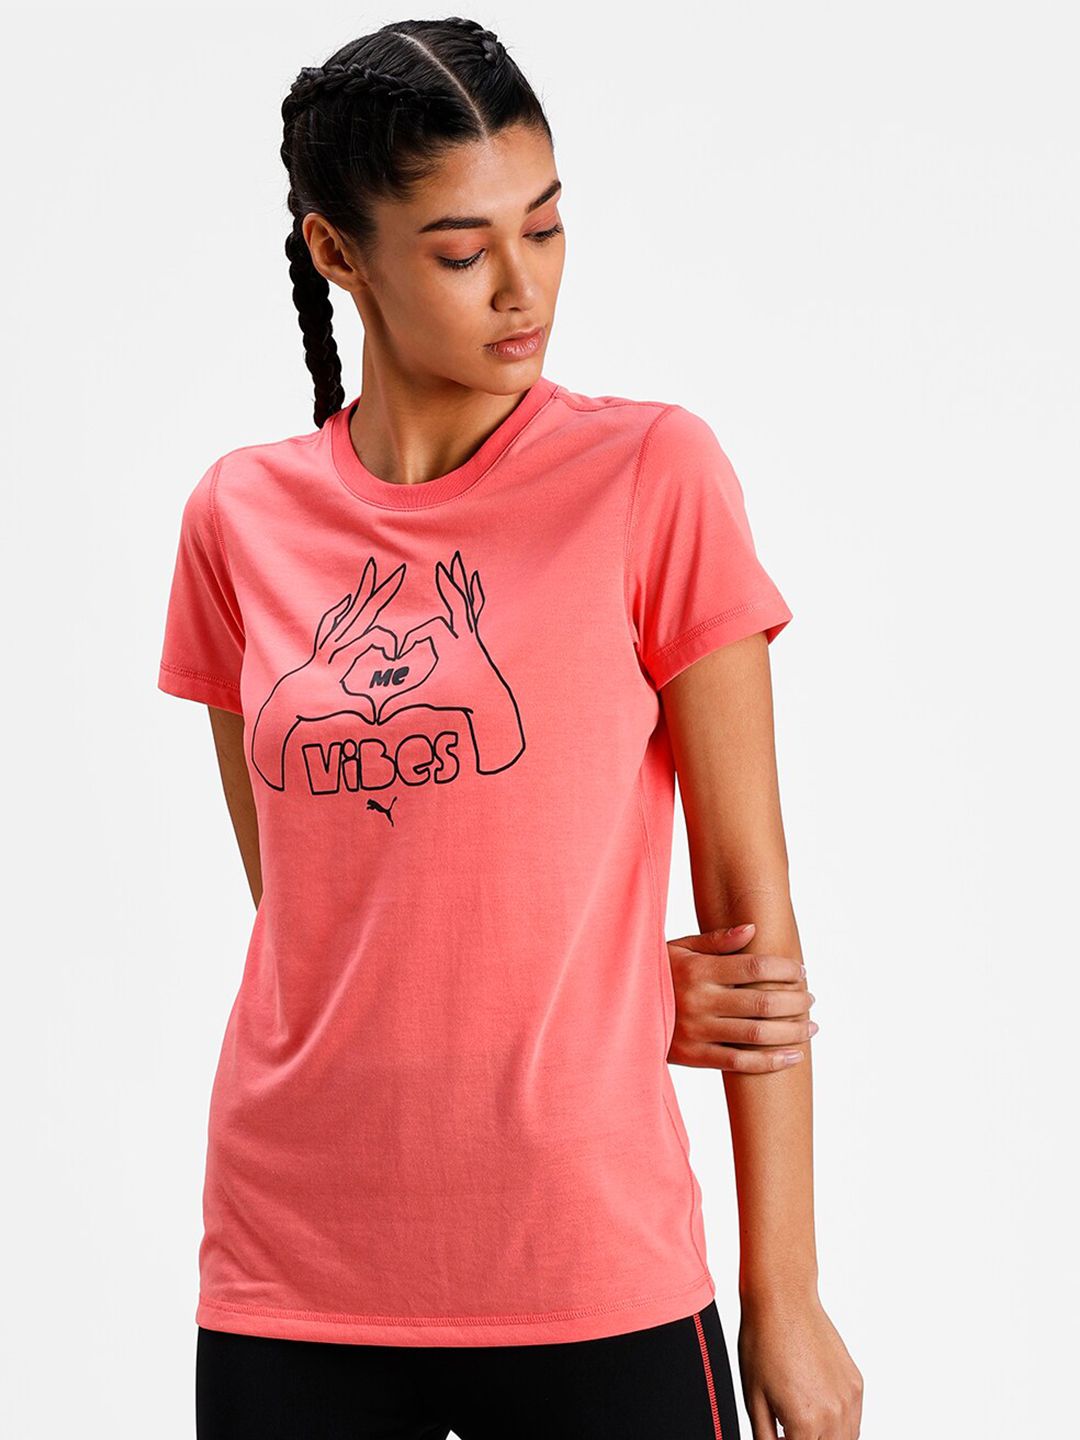 Puma Women Peach-Coloured & Black Printed dryCELL Training or Gym T-shirt Price in India